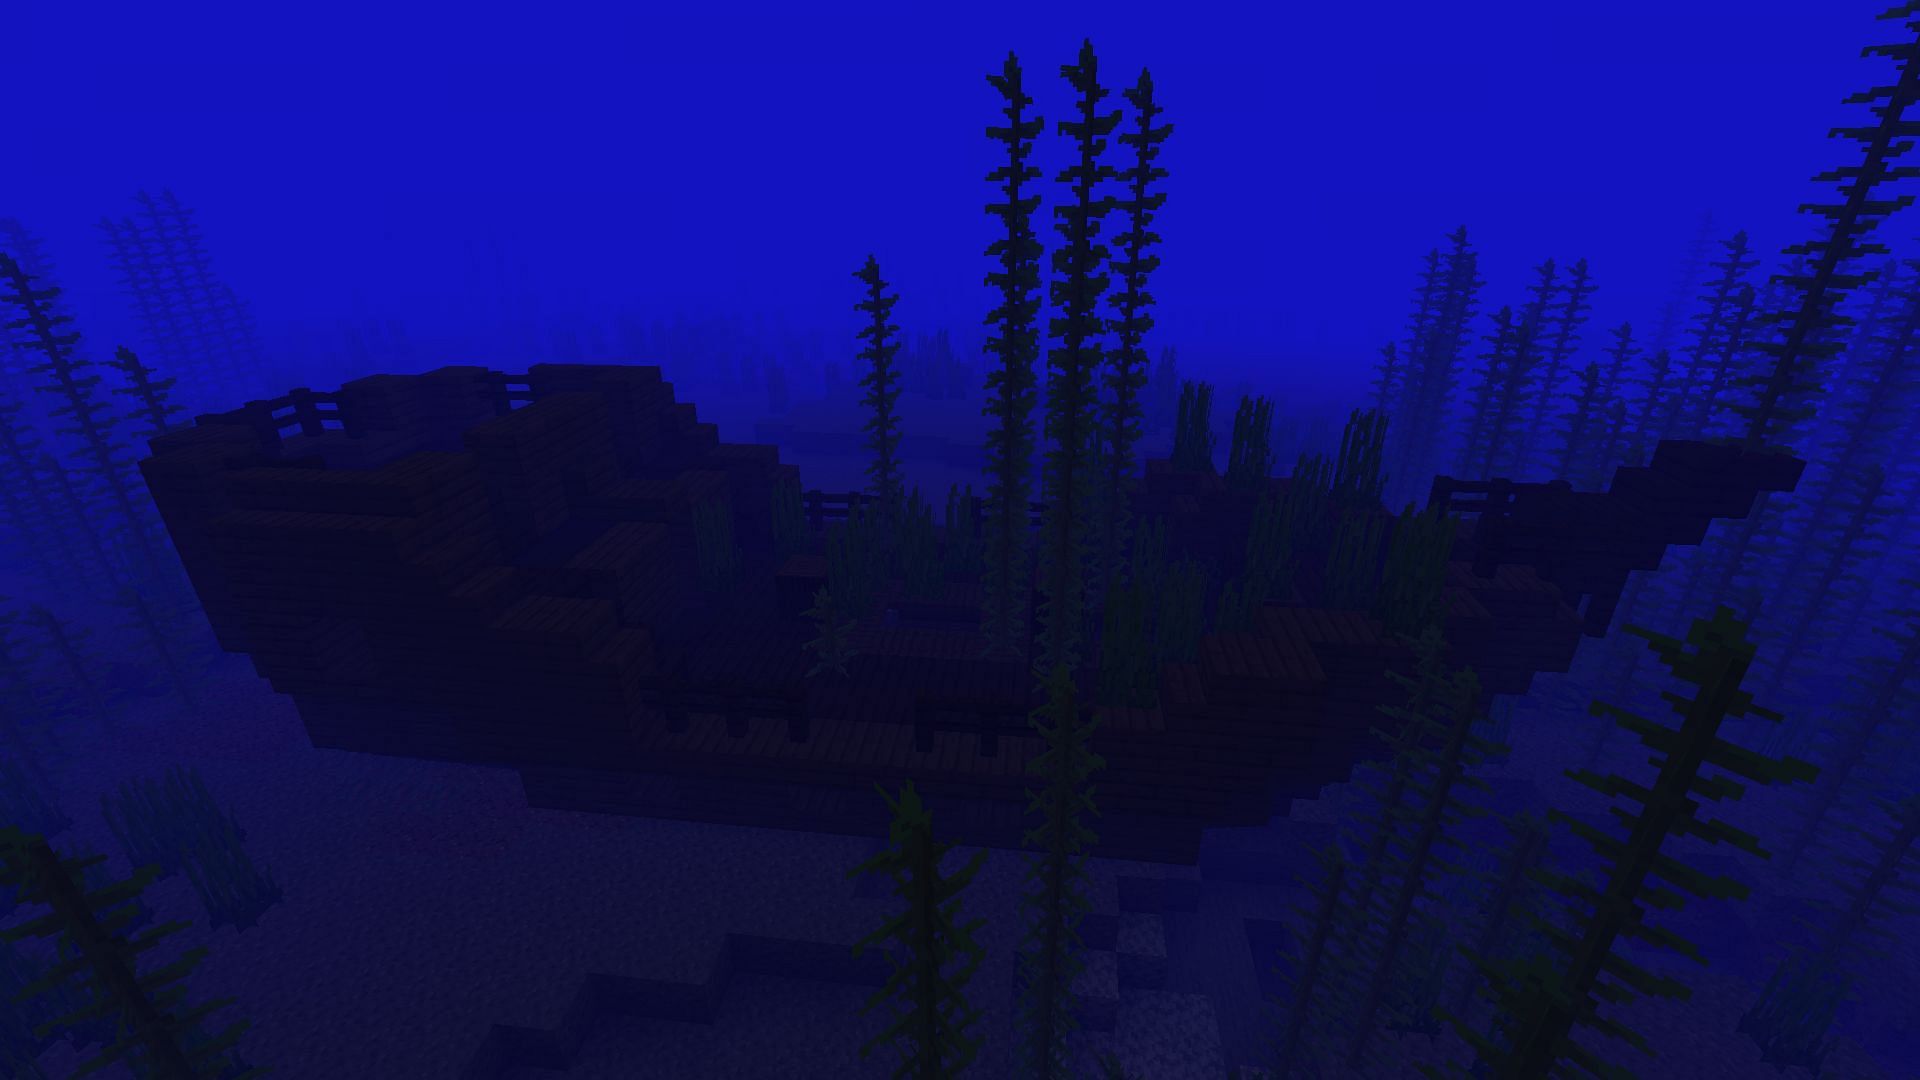 Shipwreck deep in the ocean slightly far from spawn in Minecraft 1.19 (Image via Mojang)